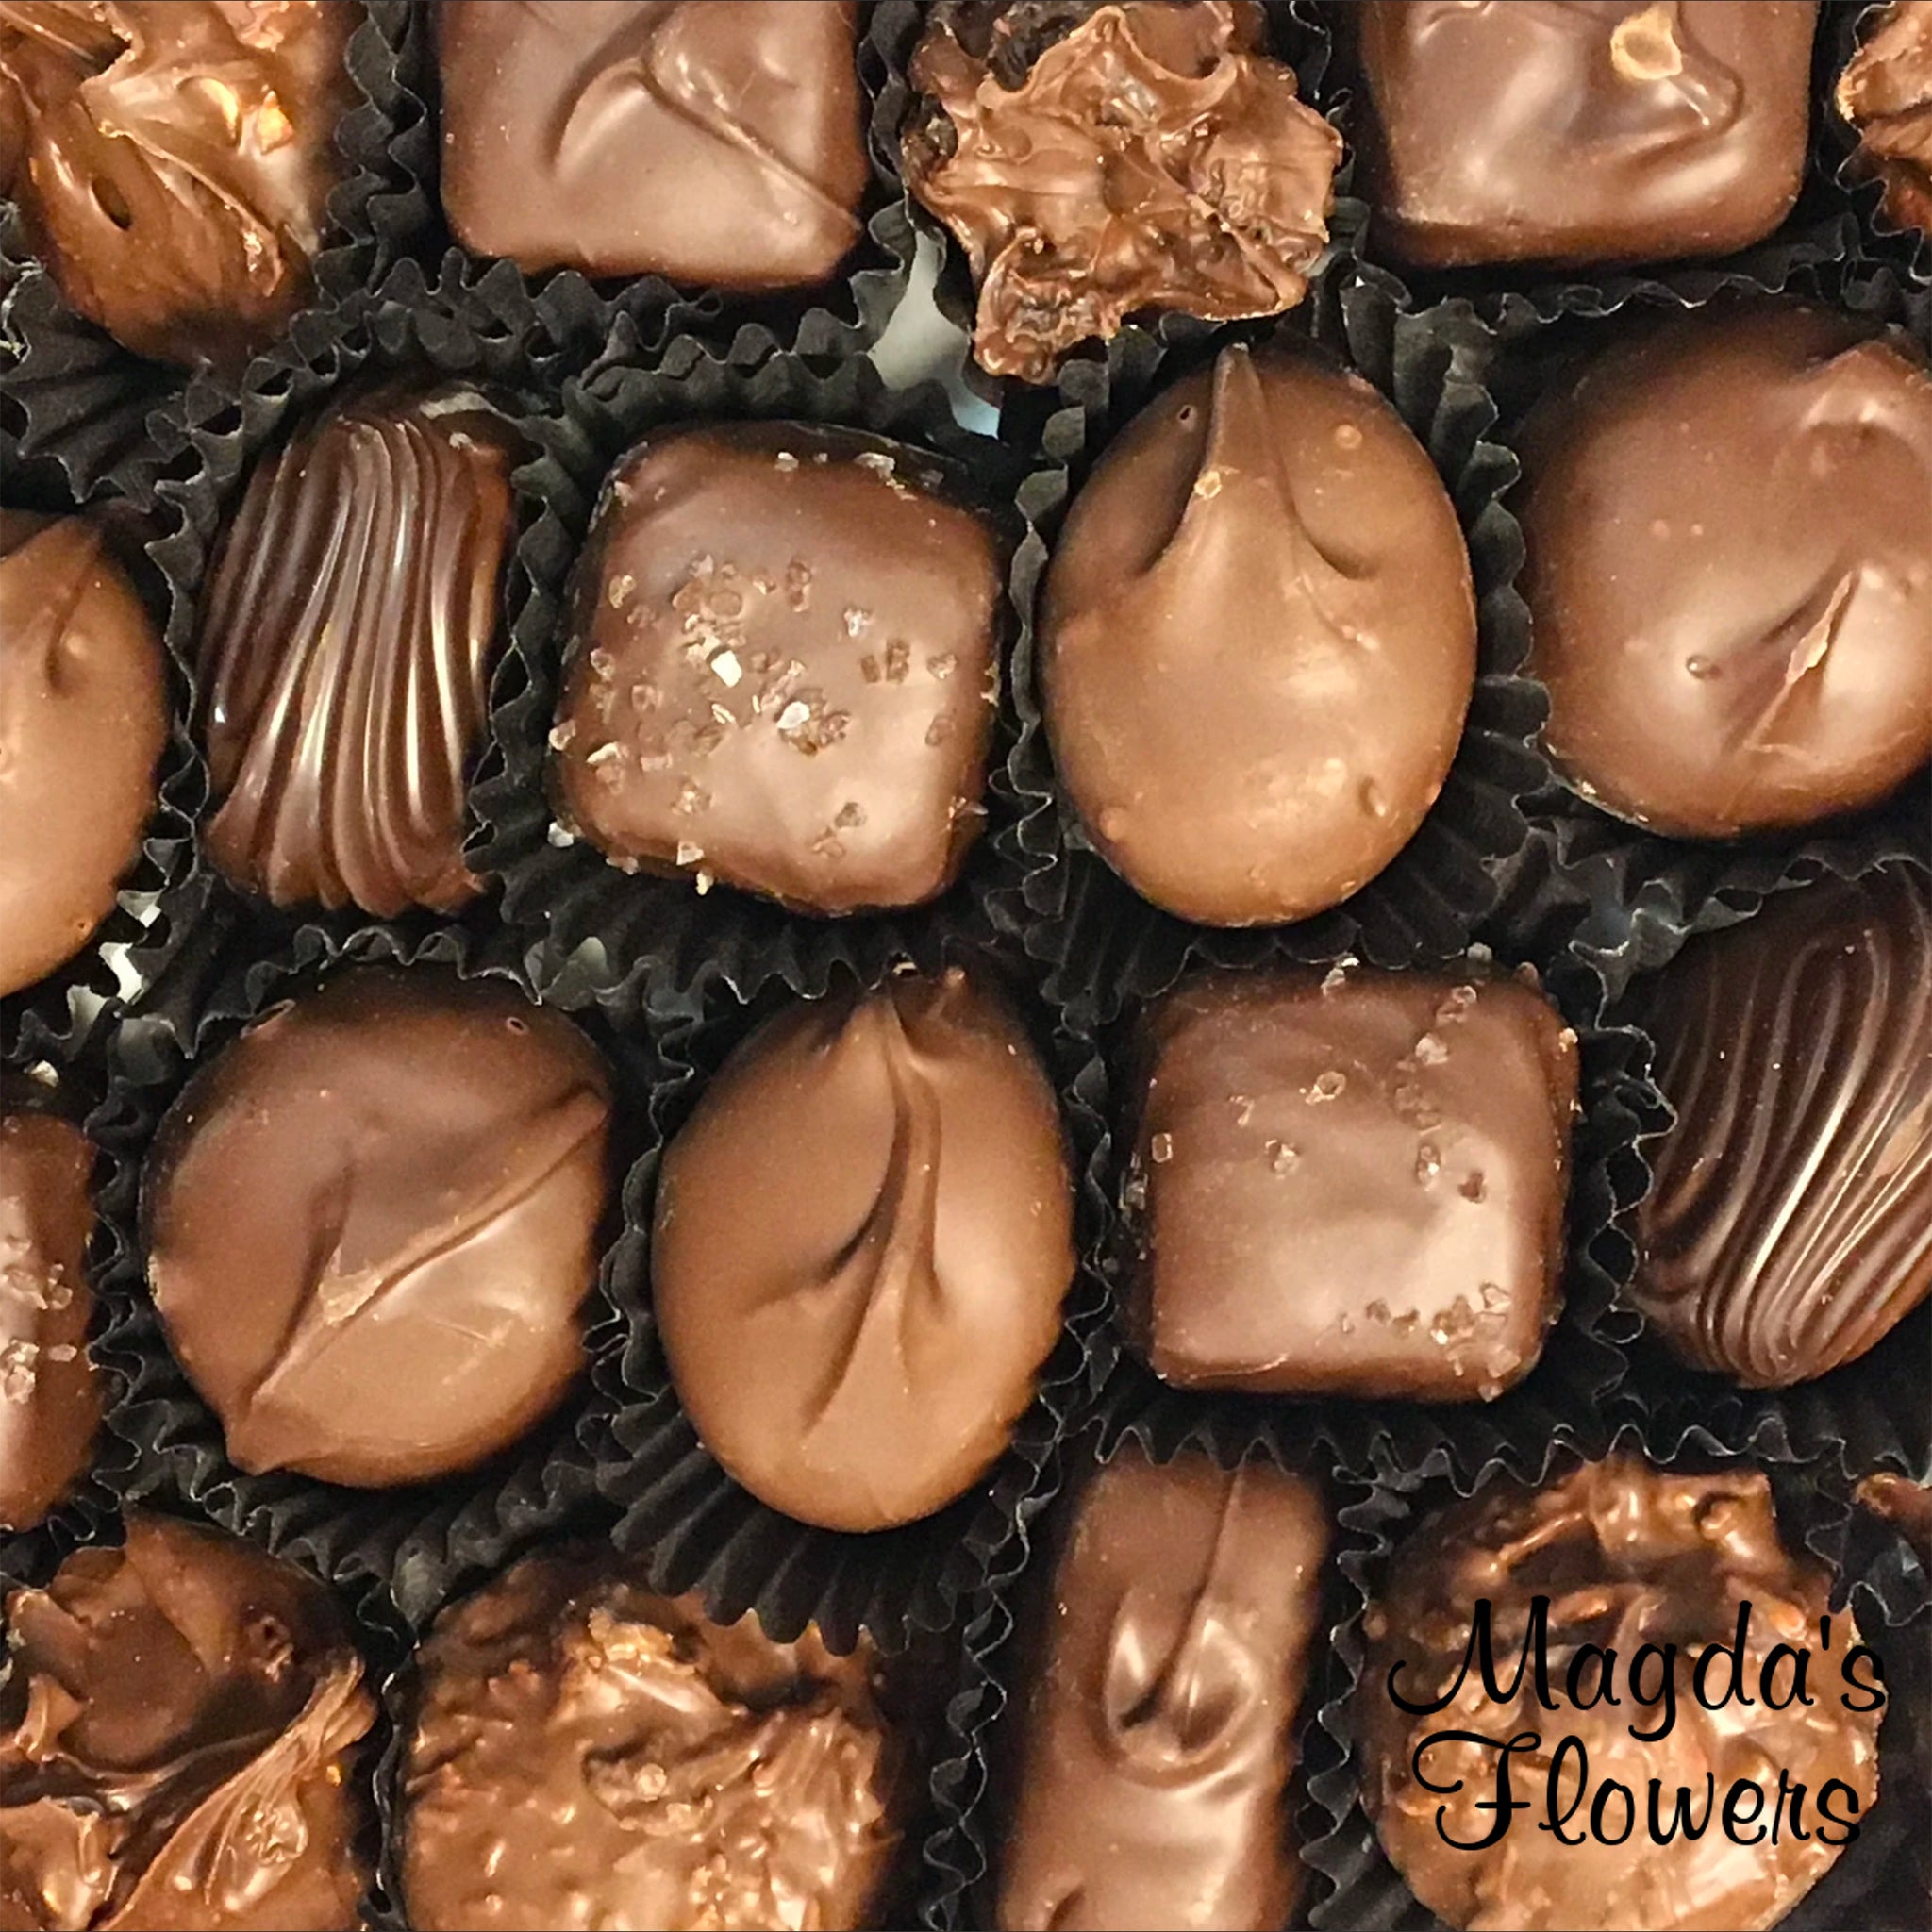 Chocolates - Add Chocolates to your Floral Order at Magdas Flowers, Salinas Florist.